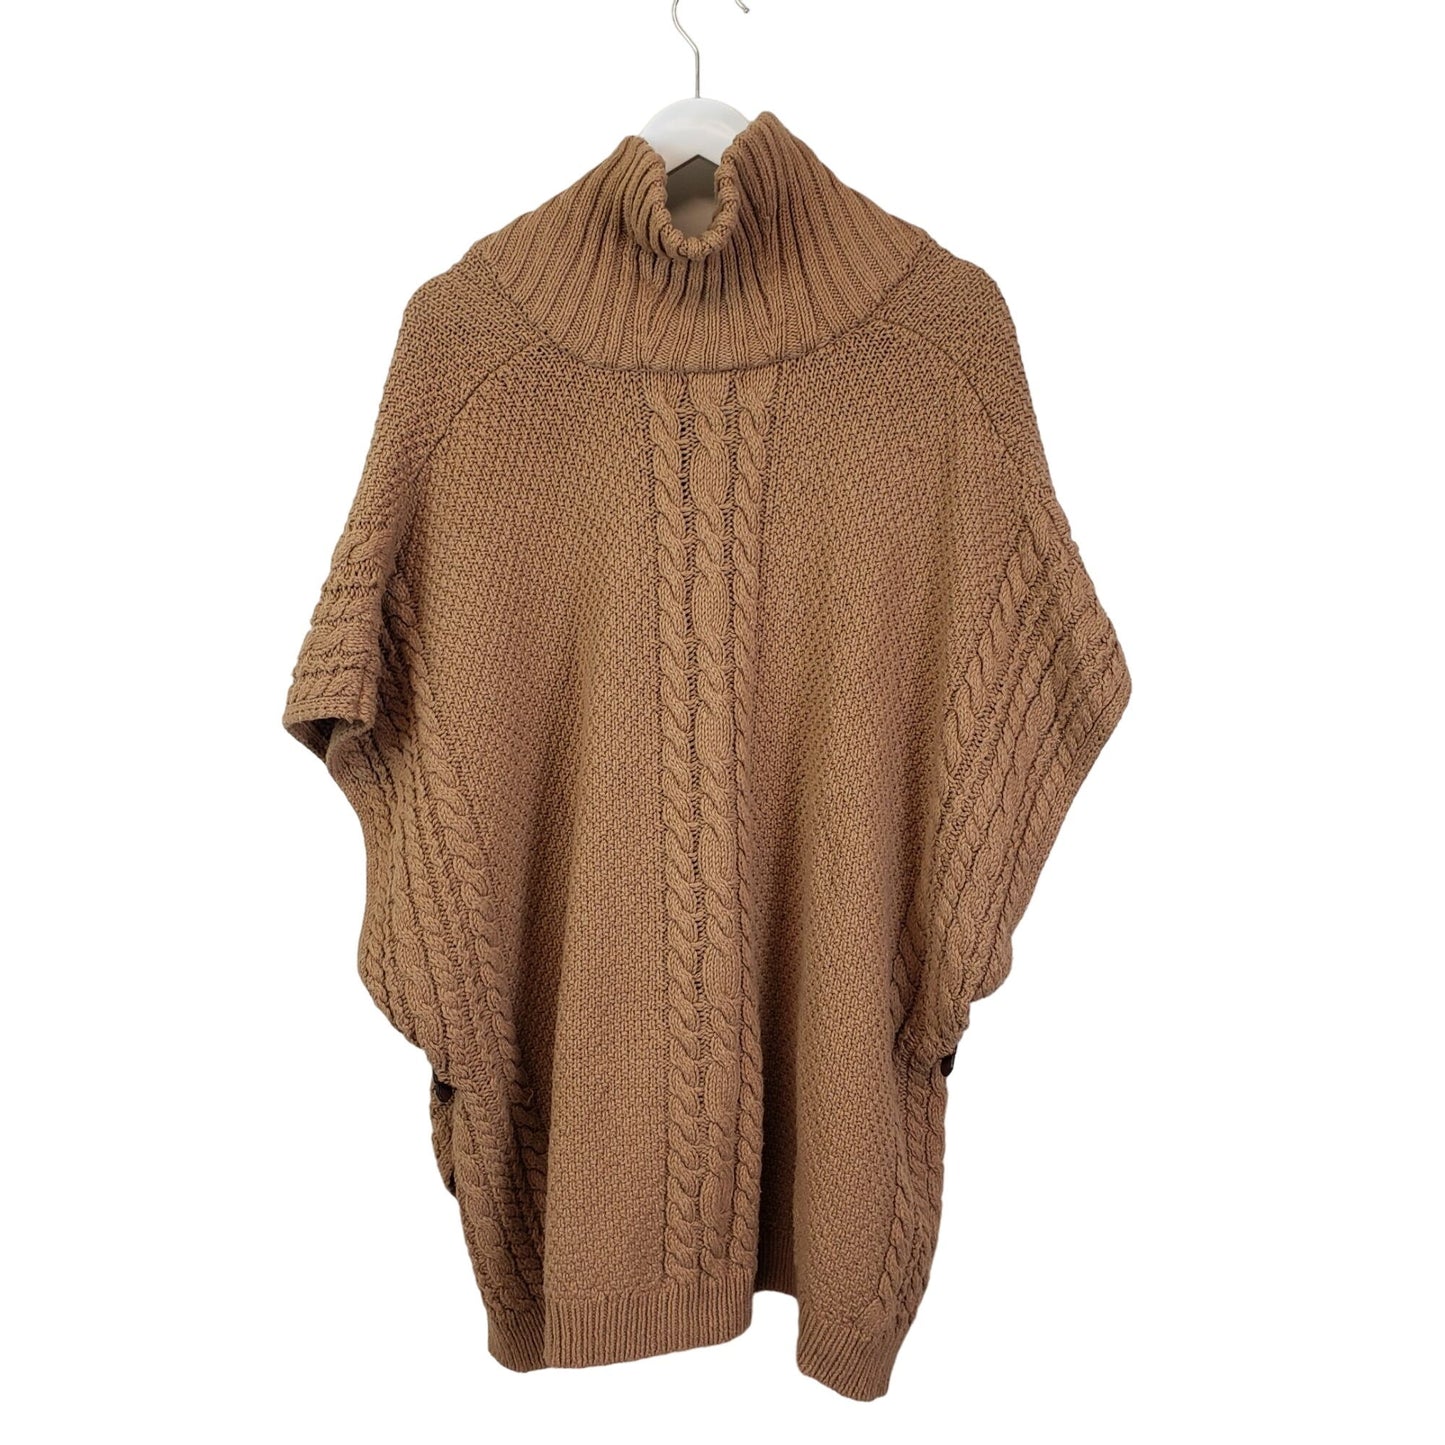 Talbots Oversized Wool Blend Cable Knit Poncho Sweater Size S/M